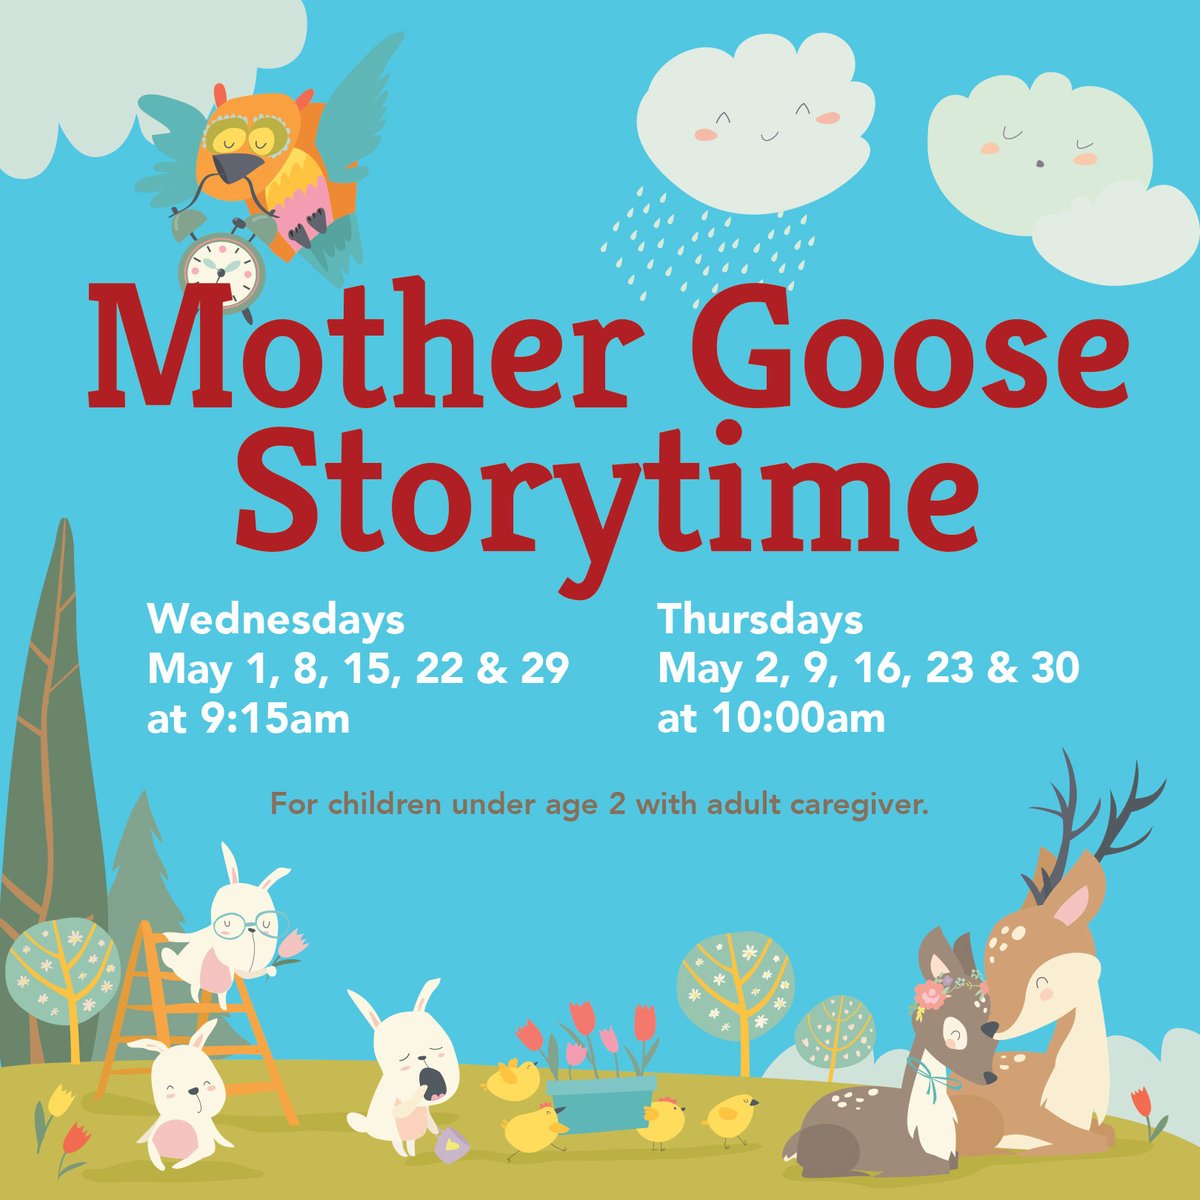 Join Miss Terri for simple stories, songs and ﬁngerplays. Registration is required (parents/caregivers do not need to register).

Visit our website to register.

#mothergoose #mothergoosestorytime #hhﬂ  #library #librariesrock